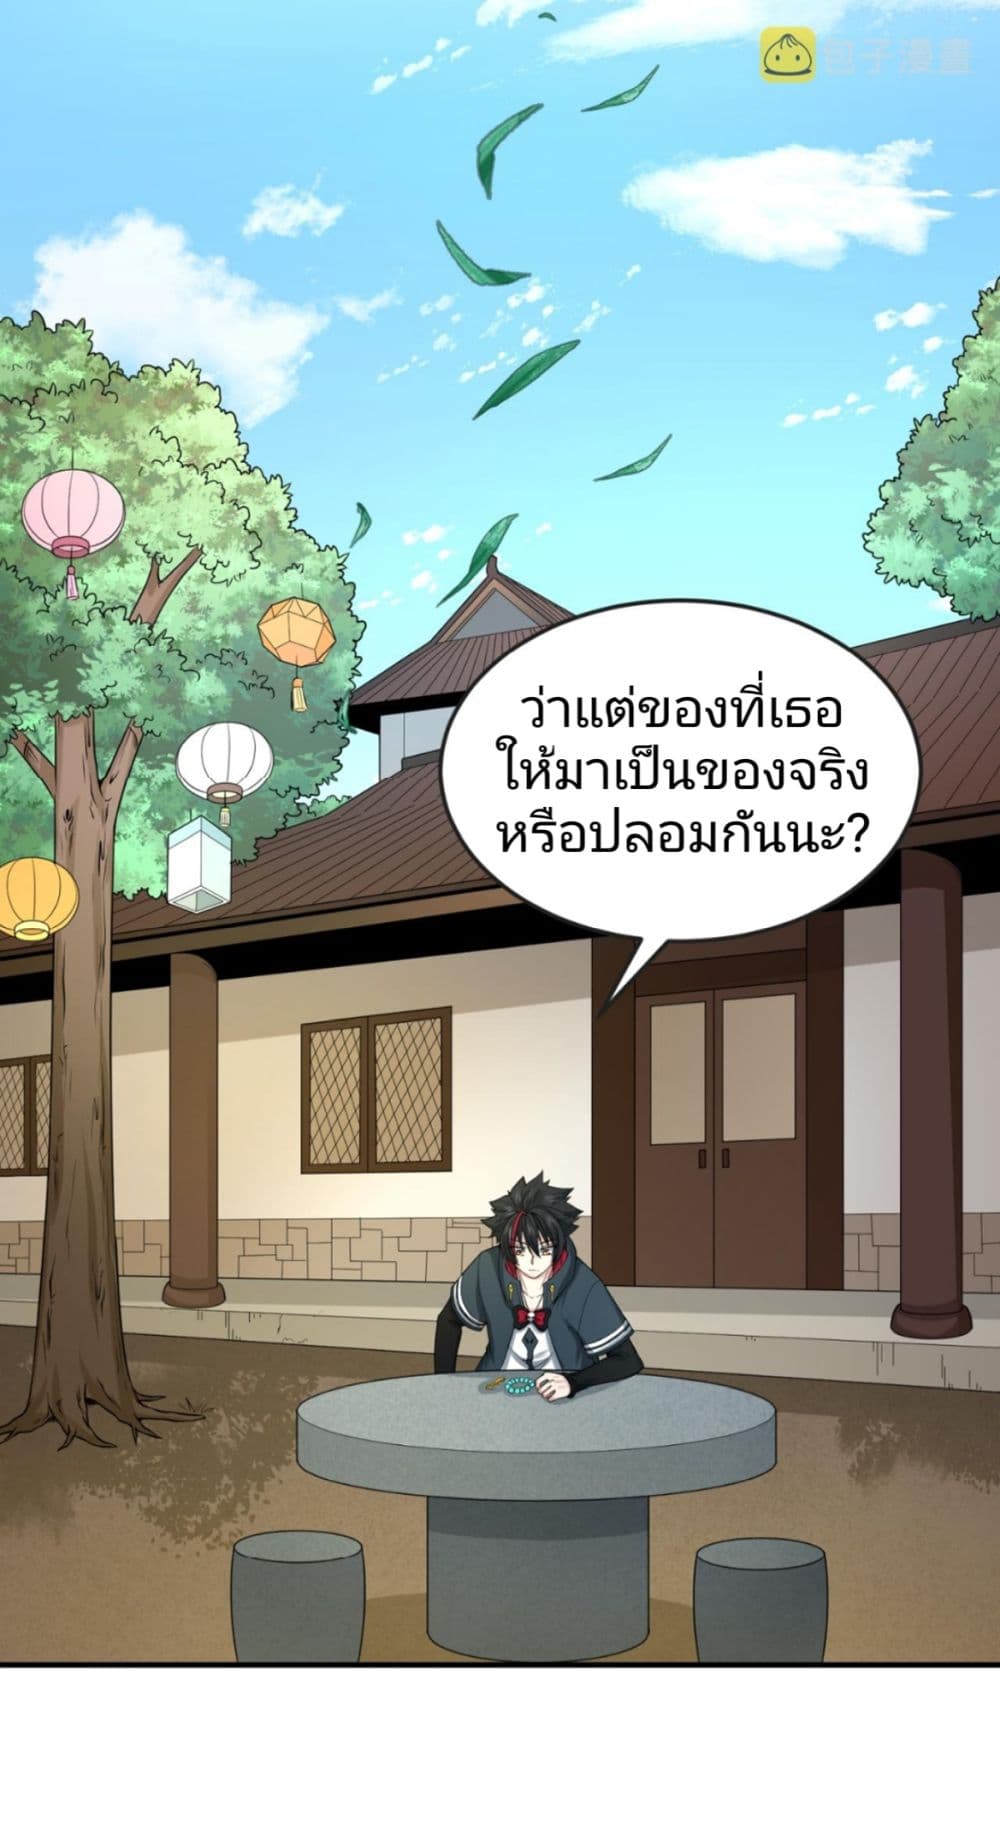 The Age of Ghost Spirits à¸à¸­à¸à¸à¸µà¹ 47 (16)